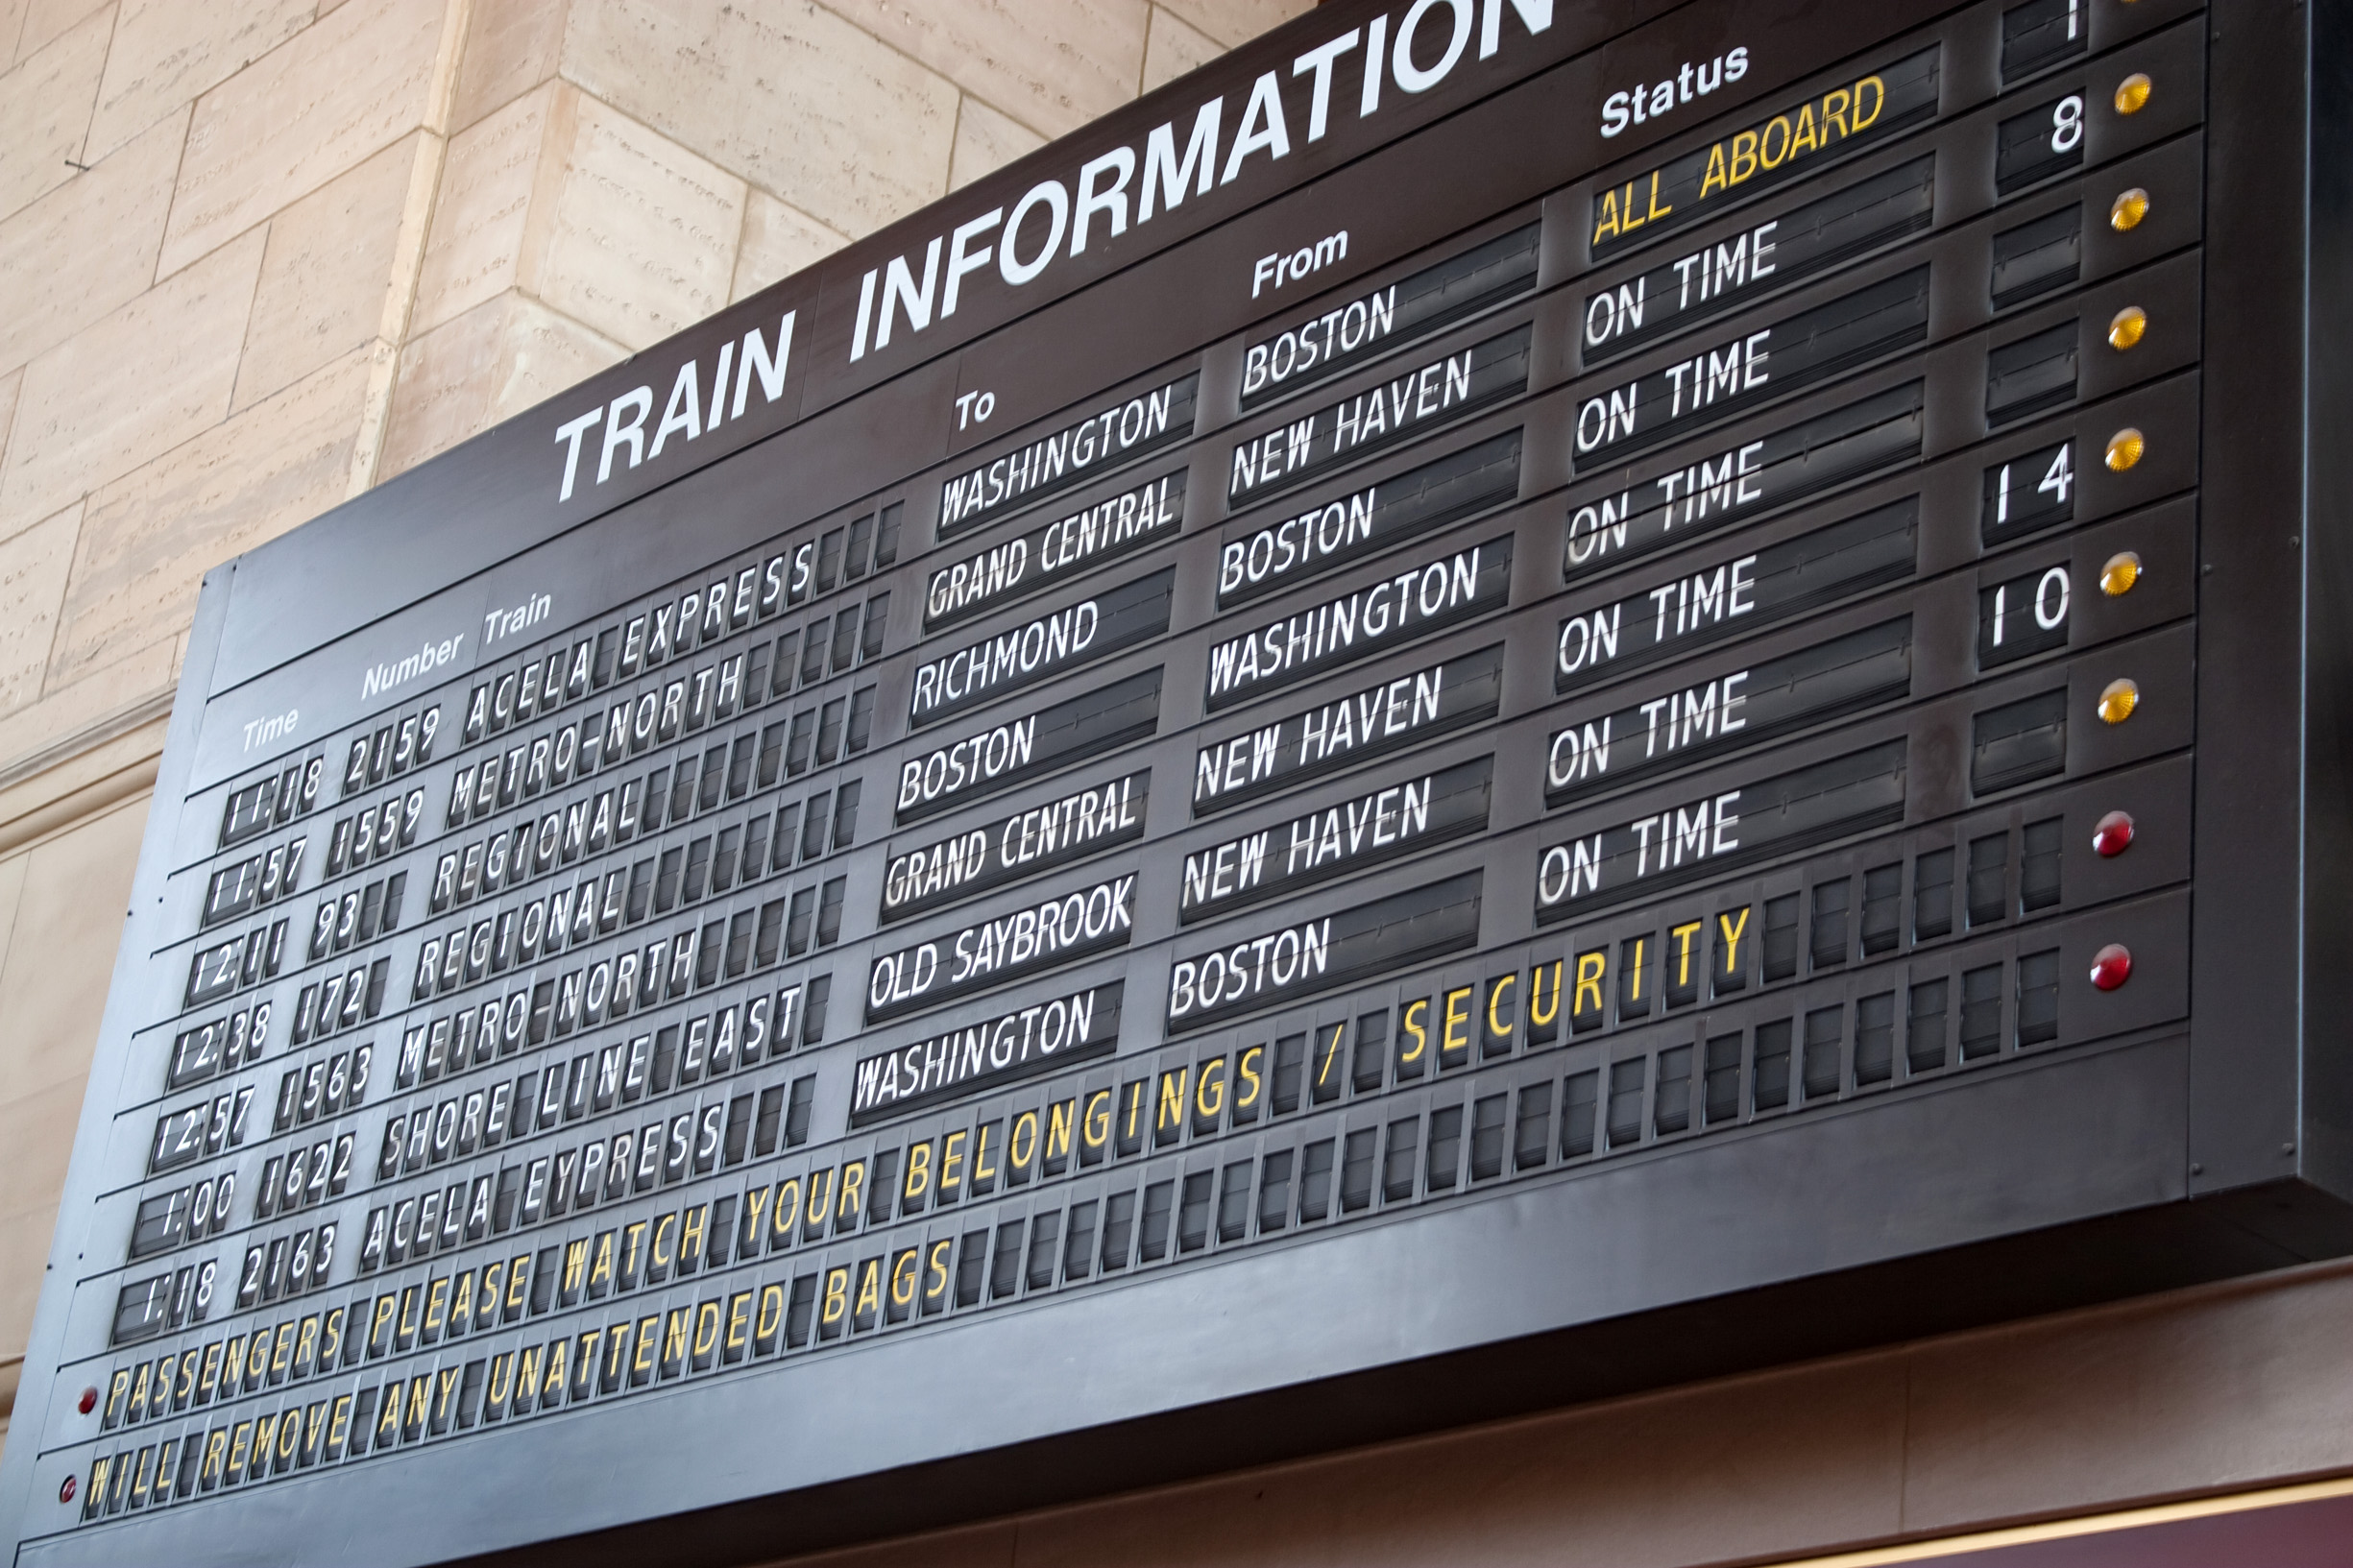 New Haven Station Schedule Board